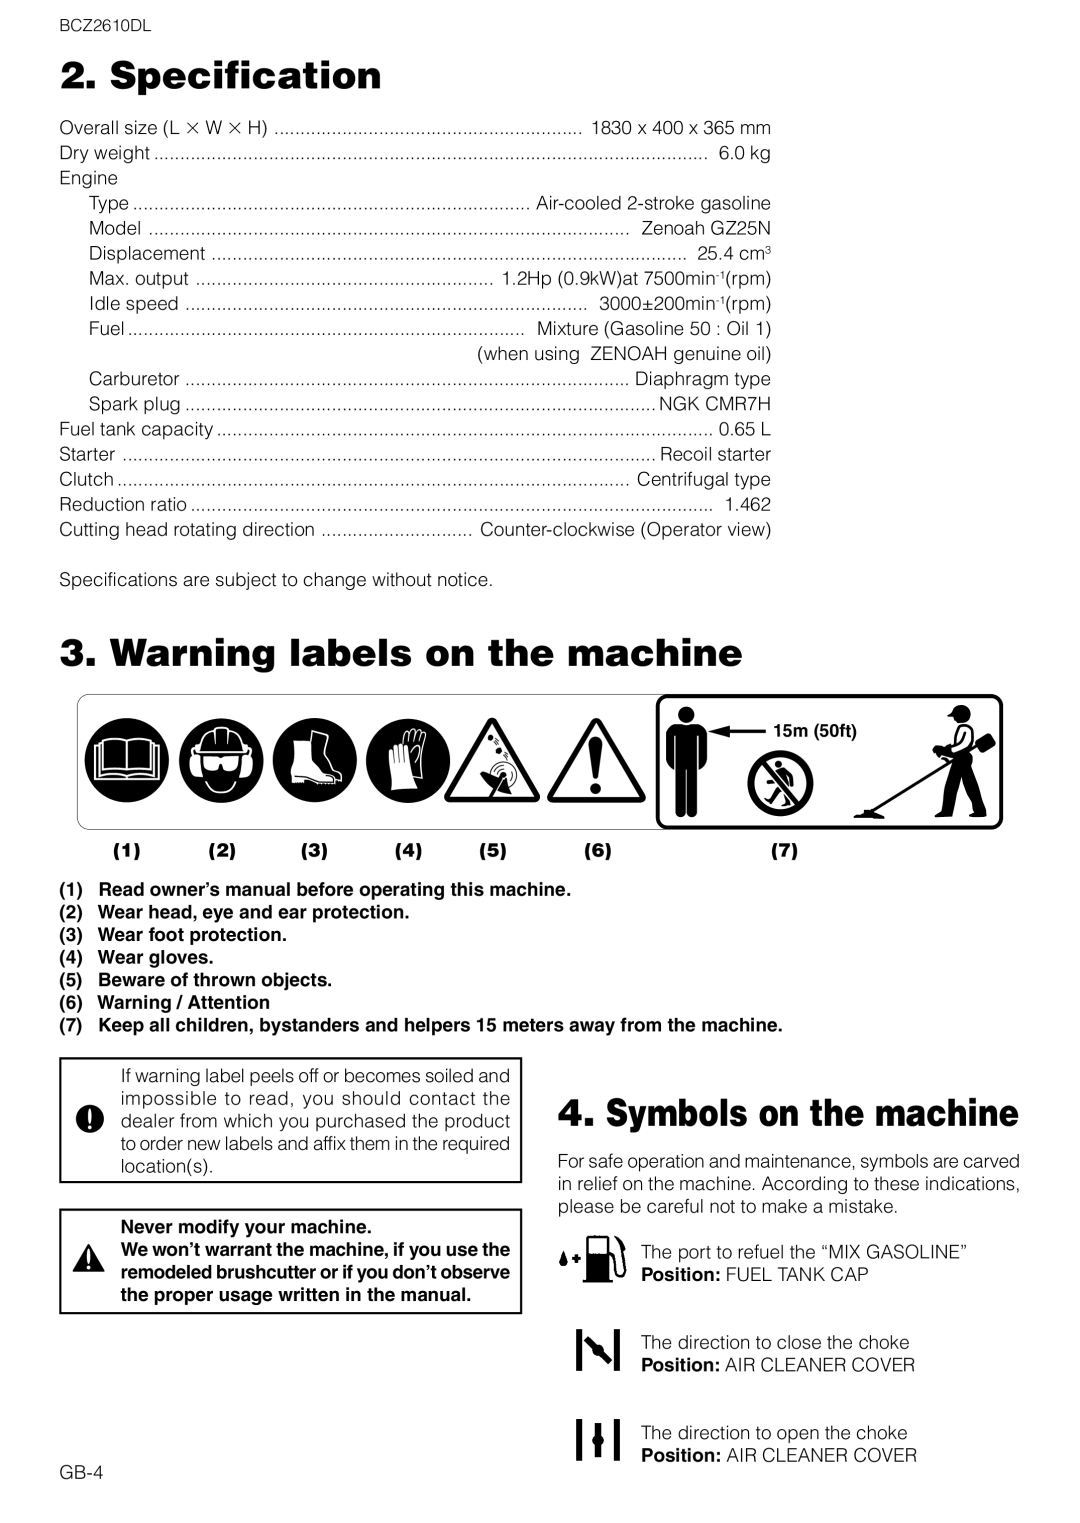 Zenoah BCZ2610DL Specification, Warning labels on the machine, Symbols on the machine, Never modify your machine 